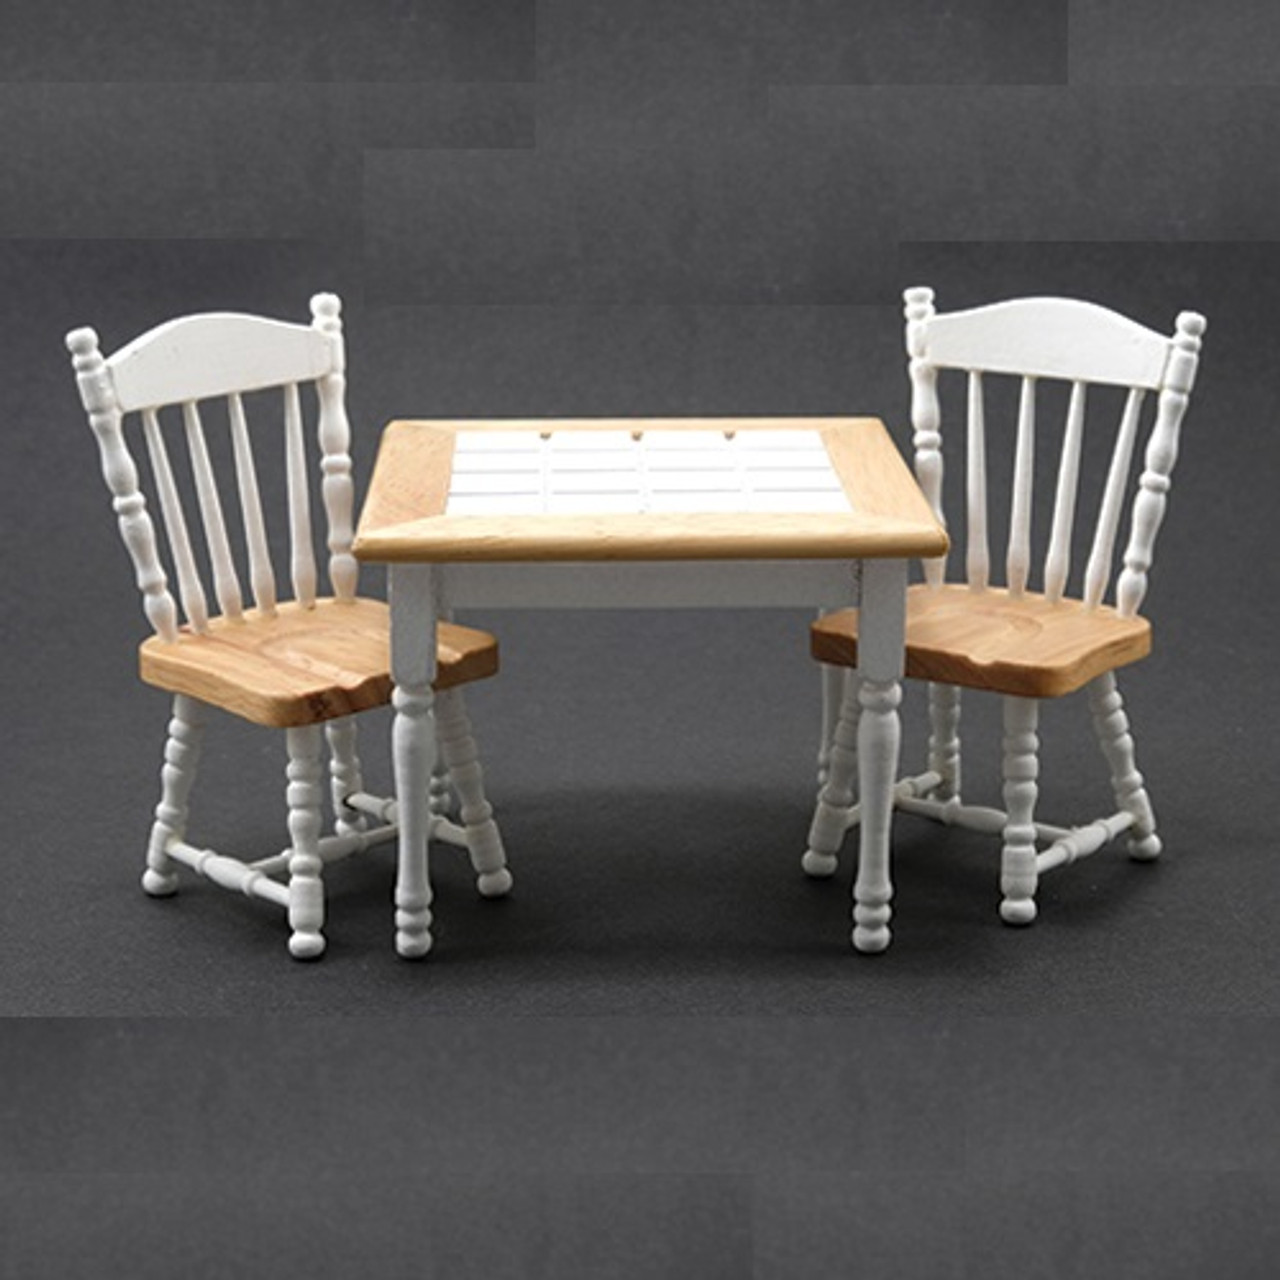 Oak/White Table with 2 Chairs (CLA91703)